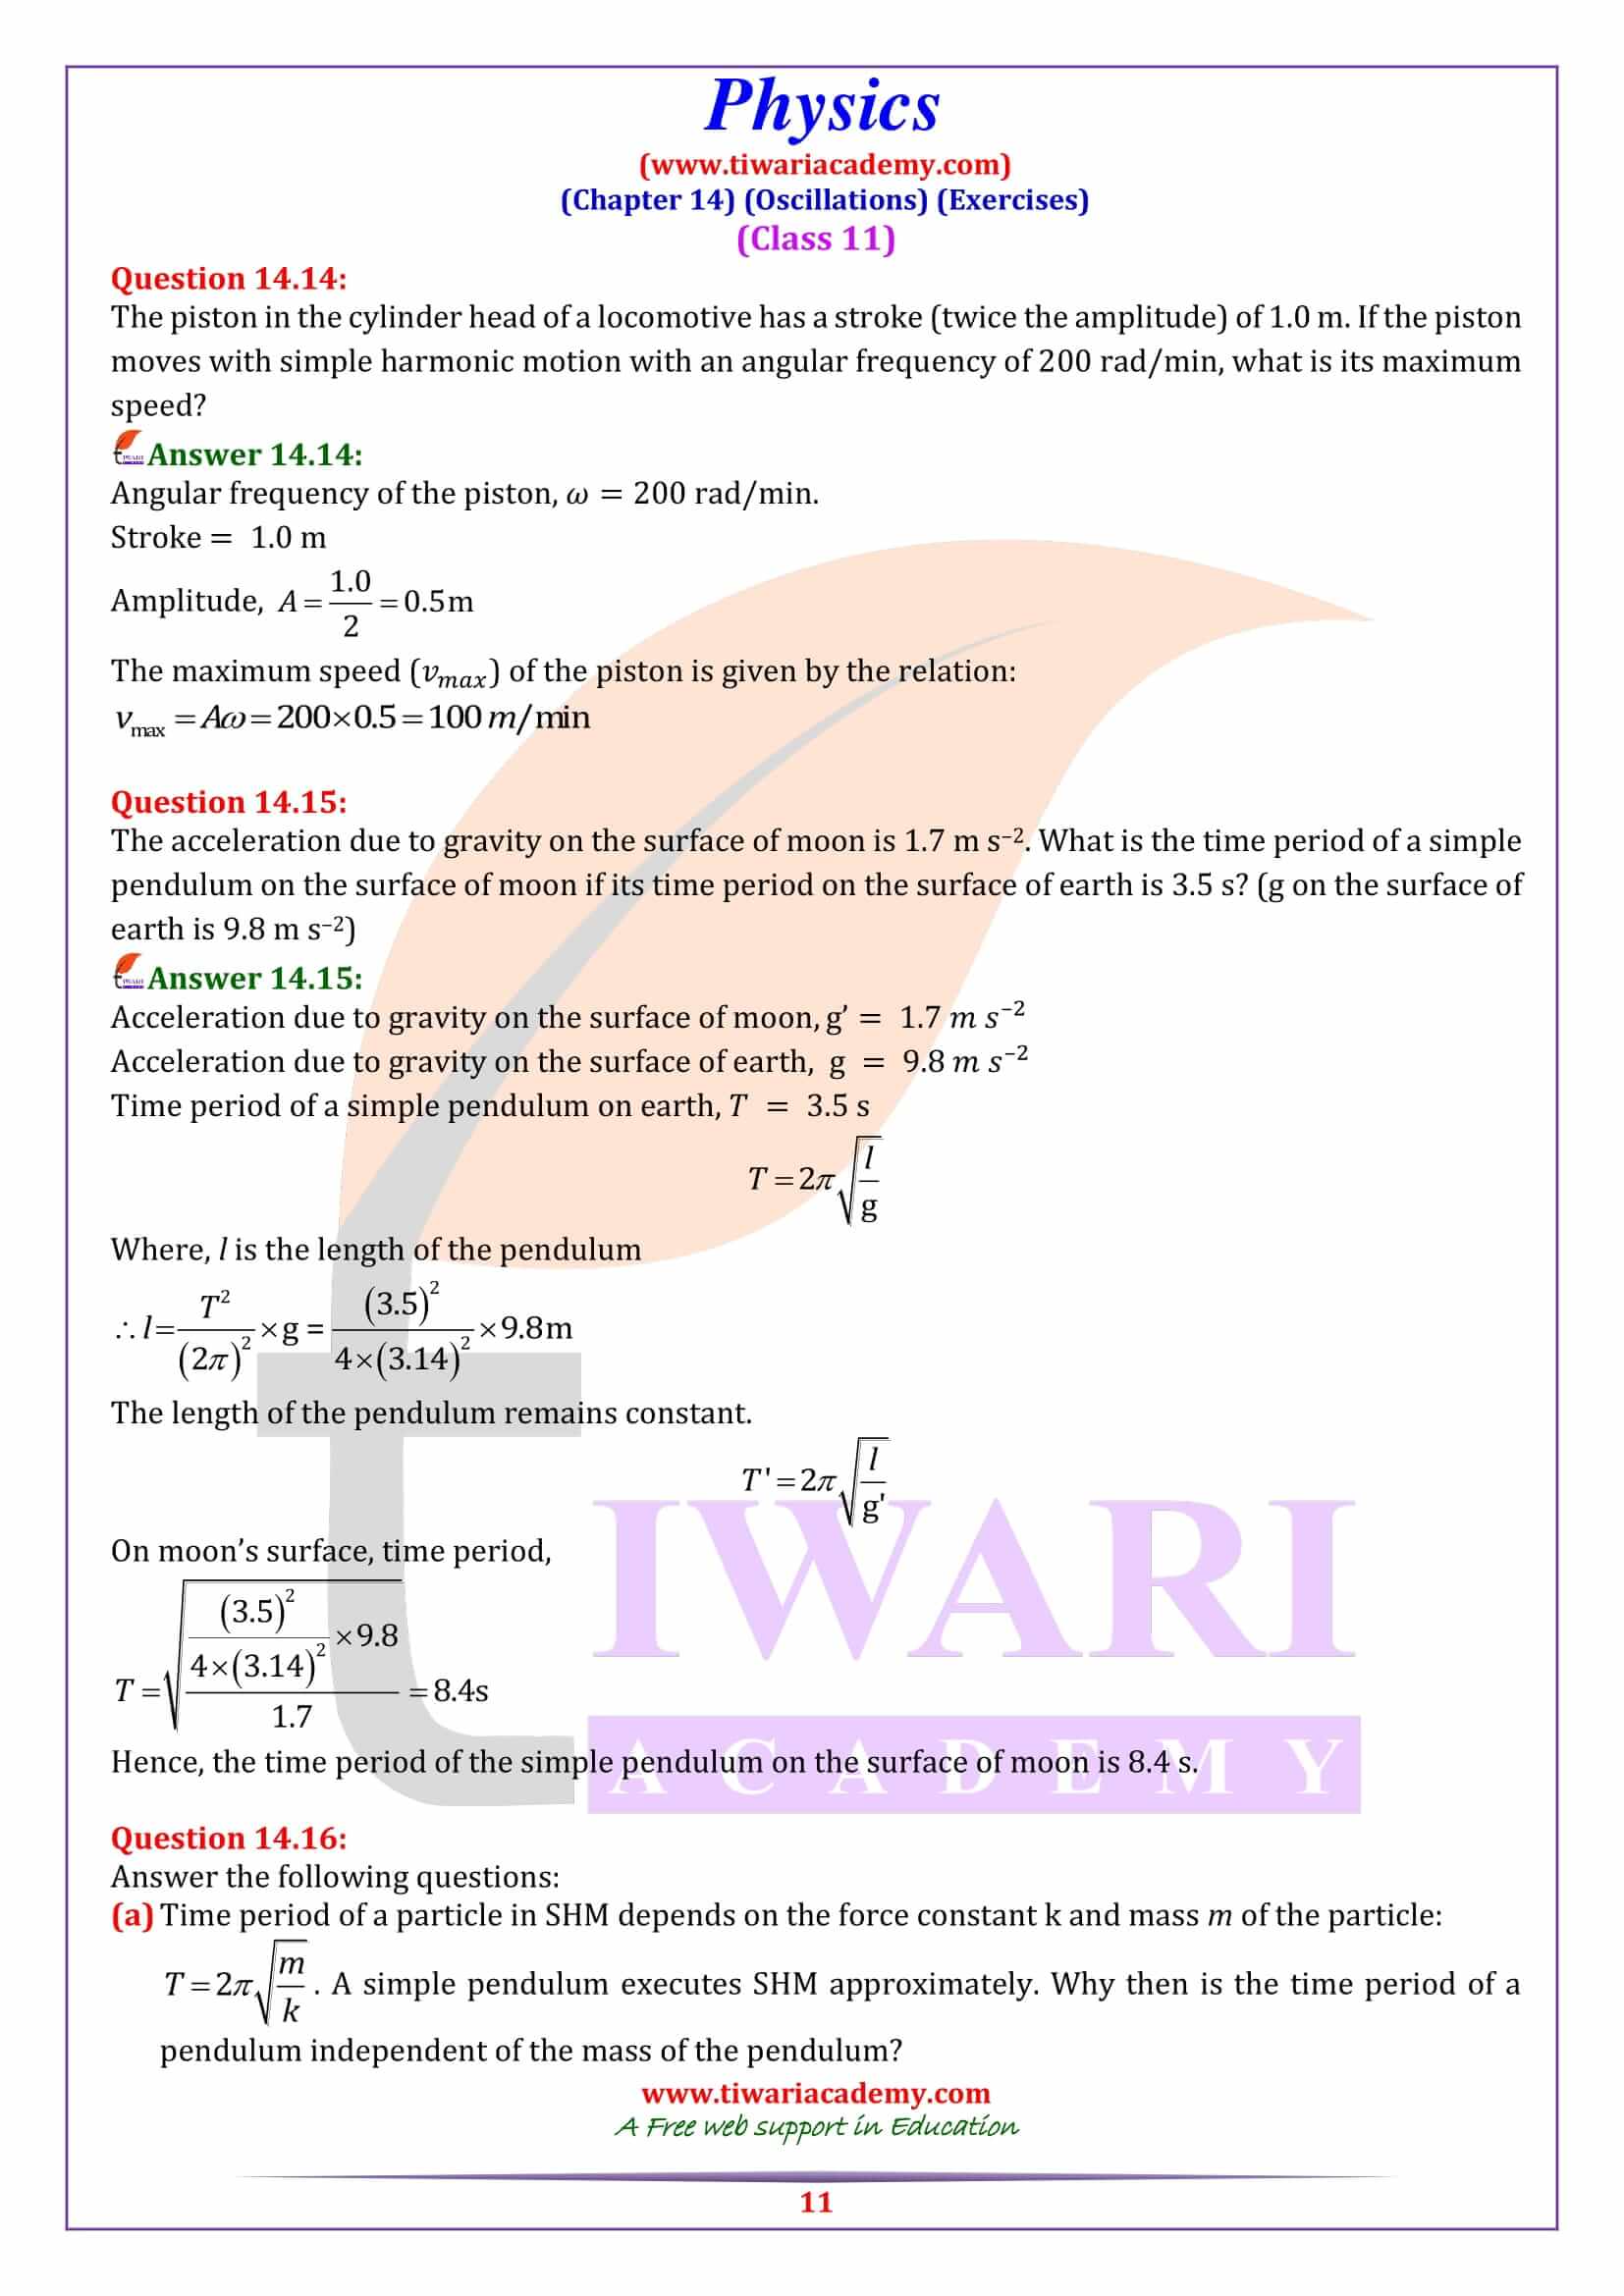 Class 11 Physics Chapter 14 free PDF download